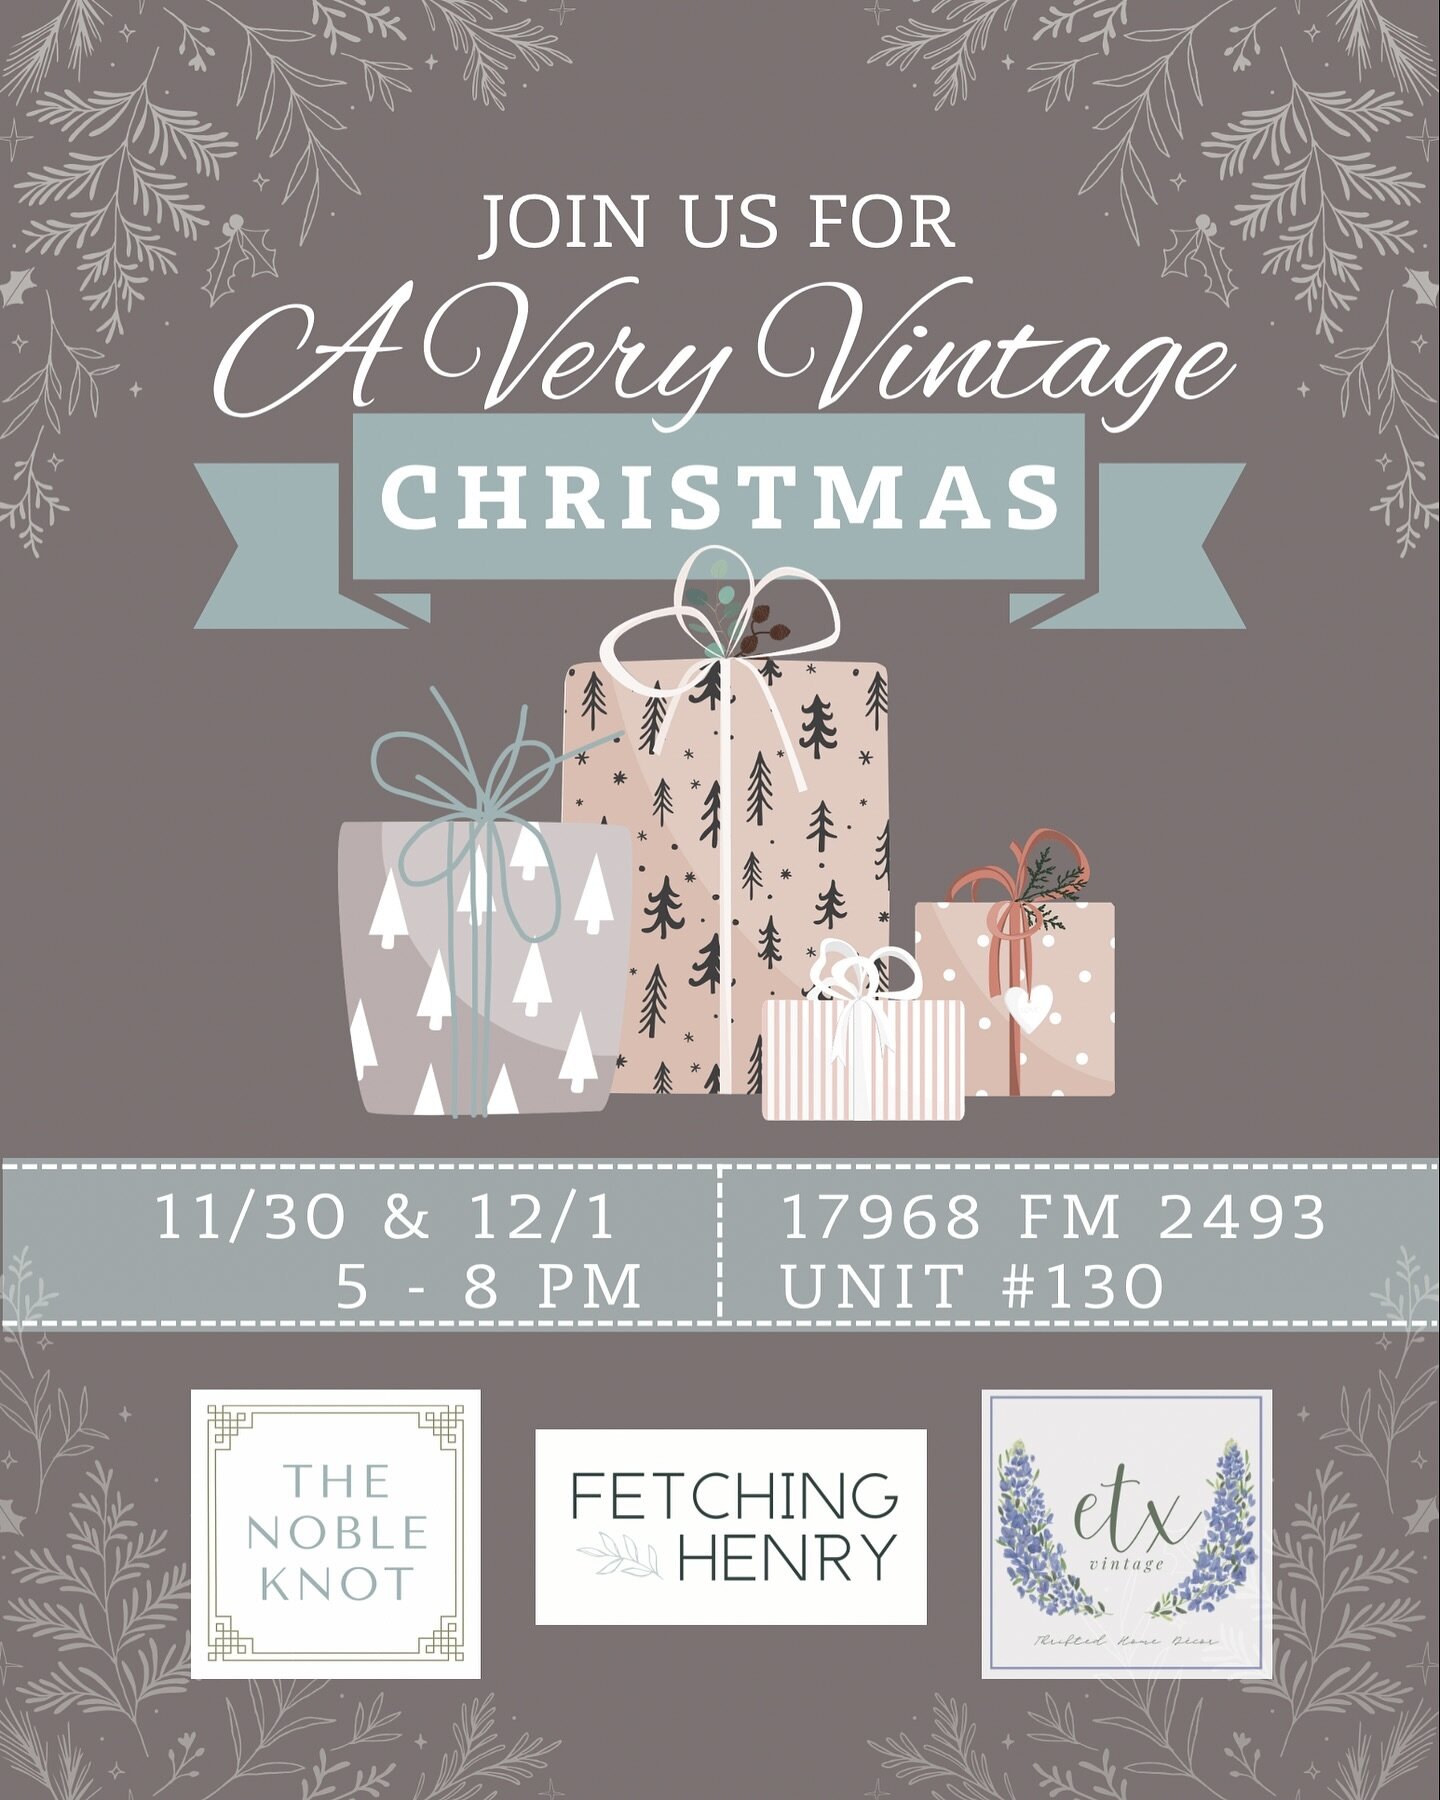 ❄️This Thursday and Friday!❄️

Join myself, @fetchinghenry, and @easttx_vintage for our Very Vintage Christmas event! 

We will be opening the shop doors for you to come browse all the gorgeous vintage home goodies, for yourself or for those on your 